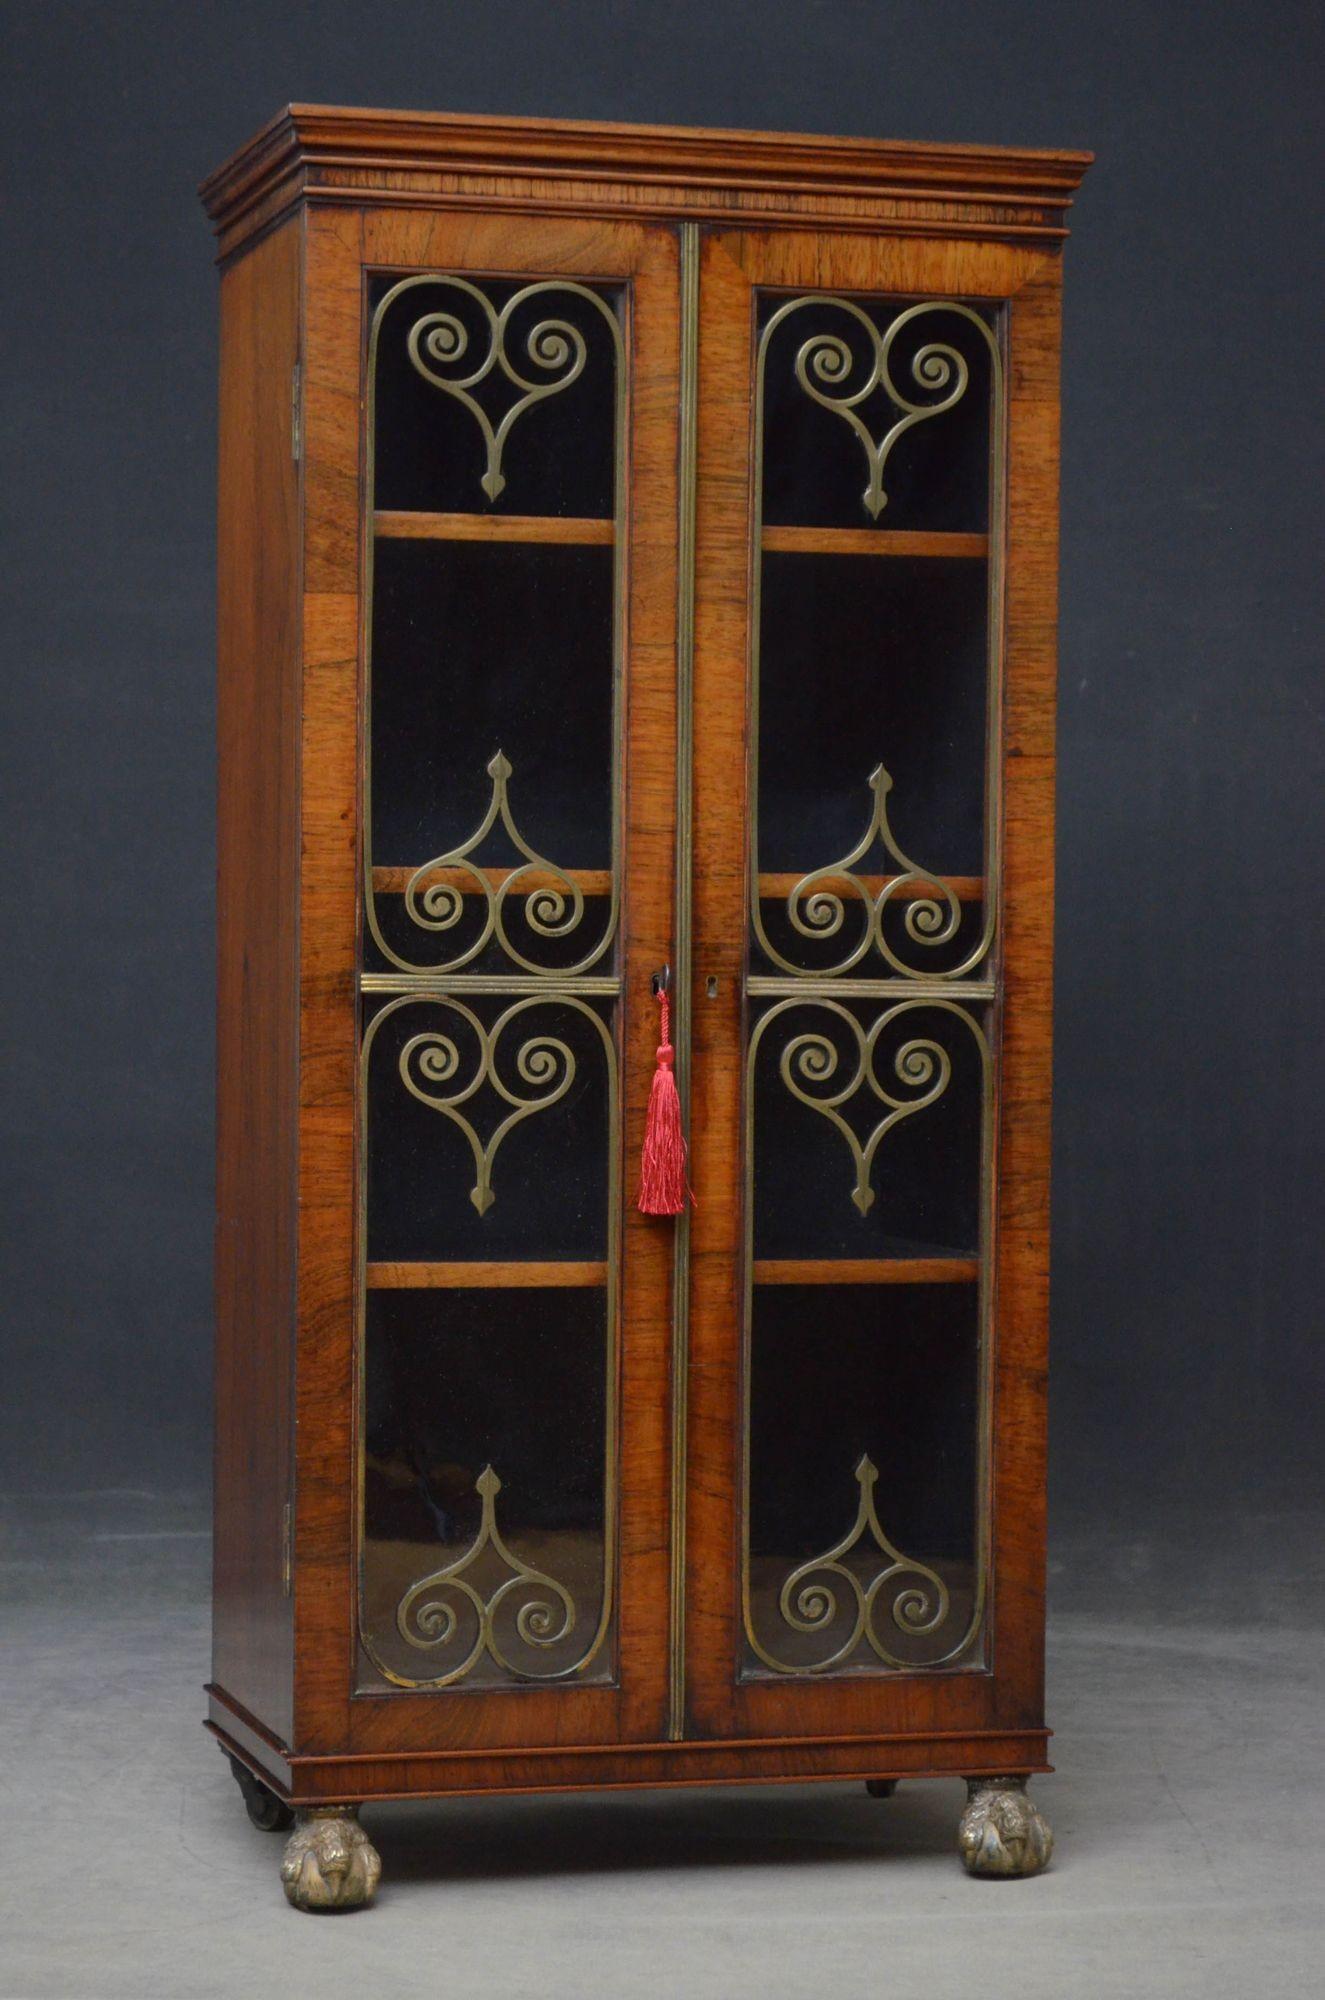 Sn5434 Fine and elegant Regency rosewood bookcase of narrow proportions, having oversailing top above shallow frieze and a pair of glazed doors fitted with original working lock and key, decorated with scroll brasses and reeded brass central bead